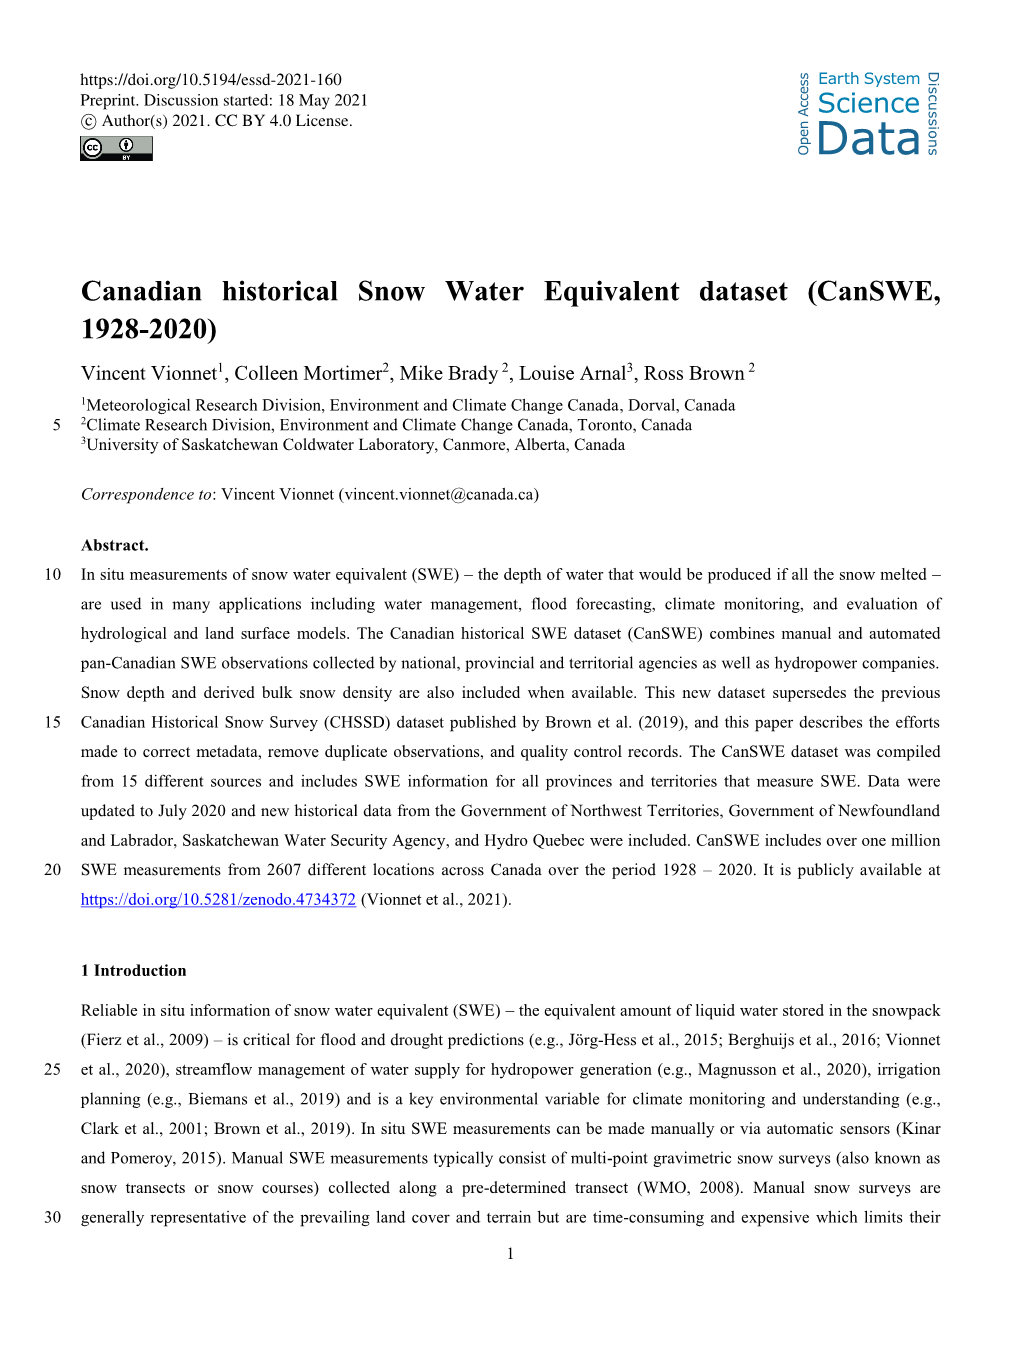 Canadian Historical Snow Water Equivalent Dataset